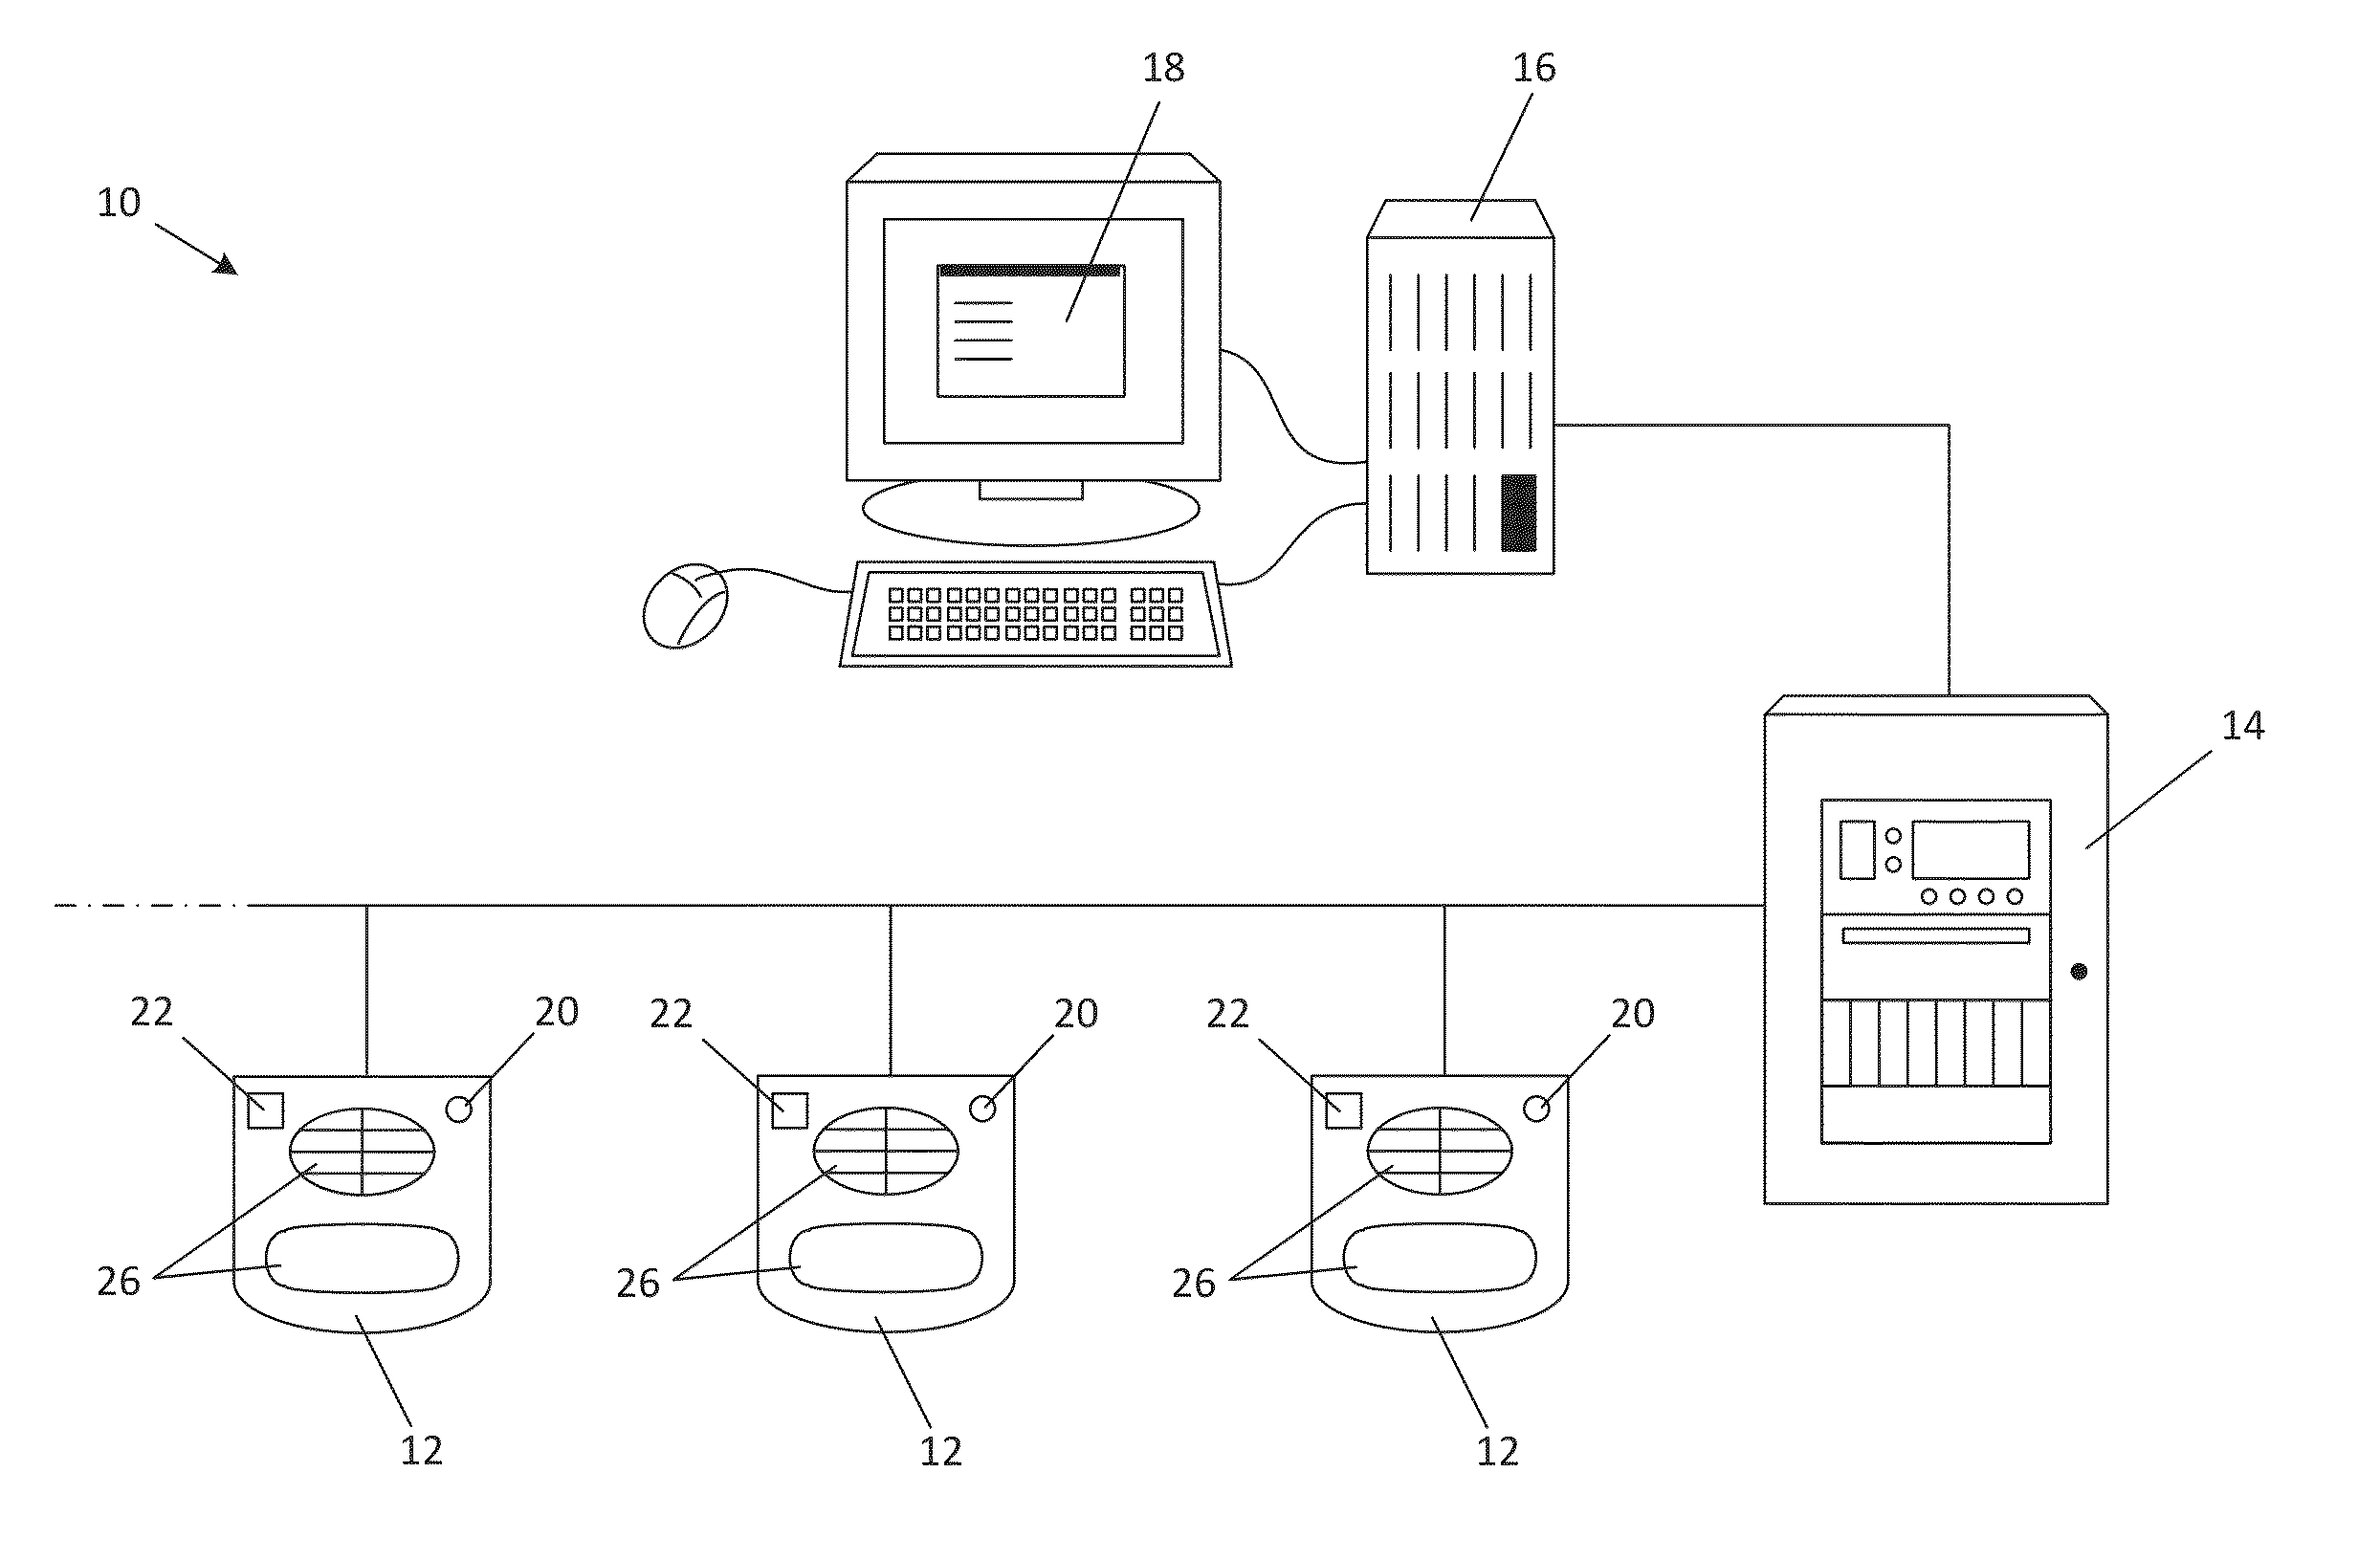 Method for self-testing notification appliances in alarm systems